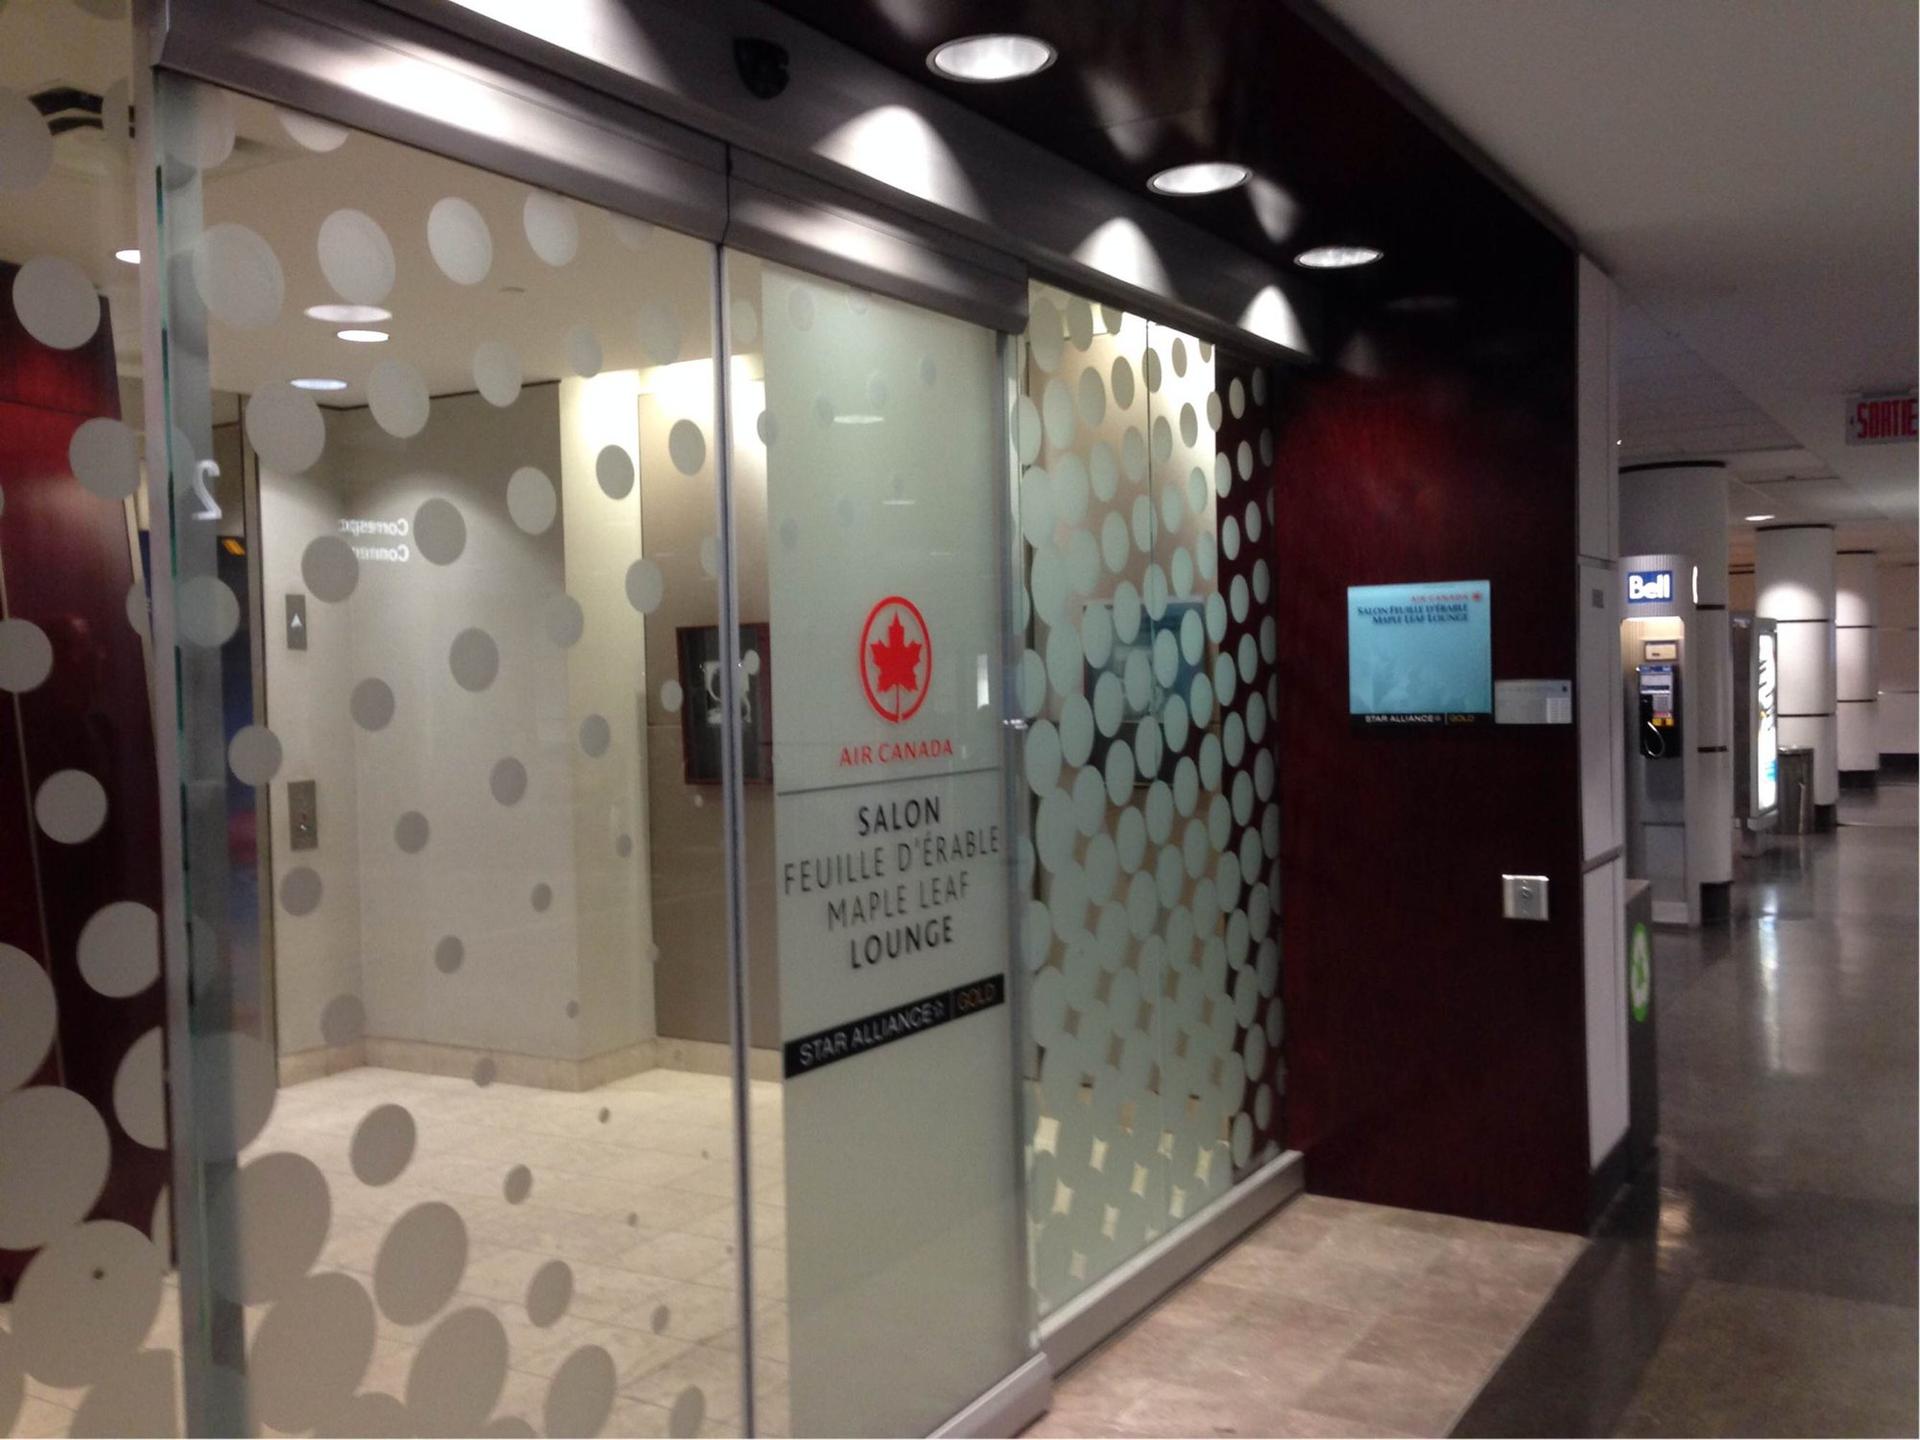 Air Canada Maple Leaf Lounge image 6 of 7